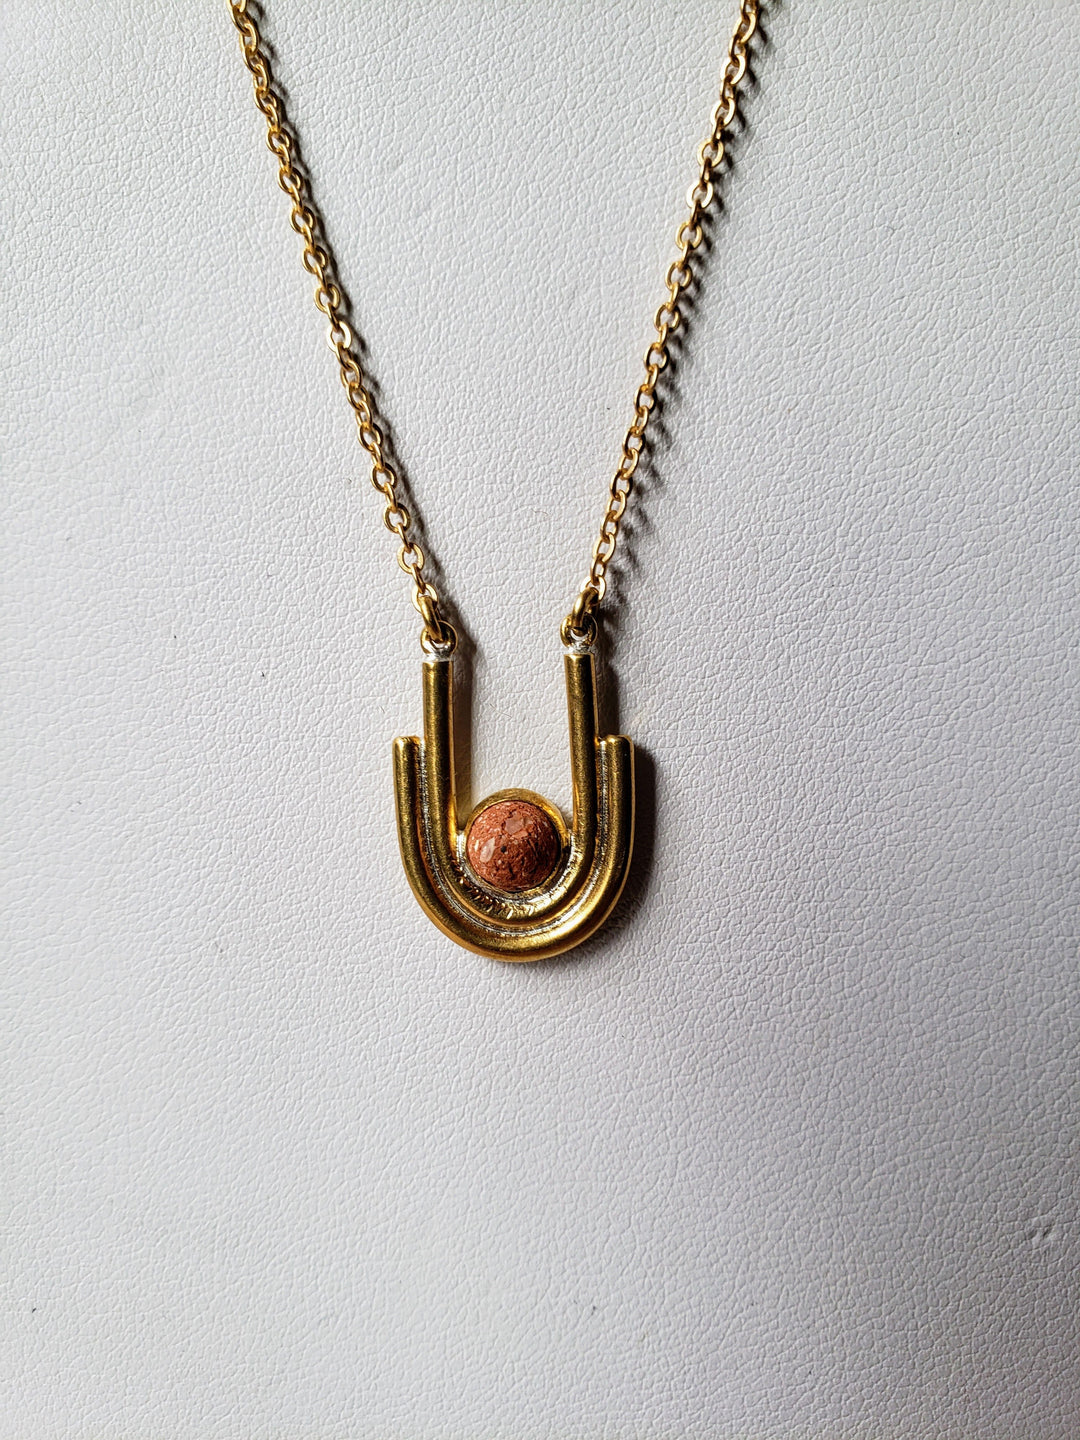 gold and clay necklace